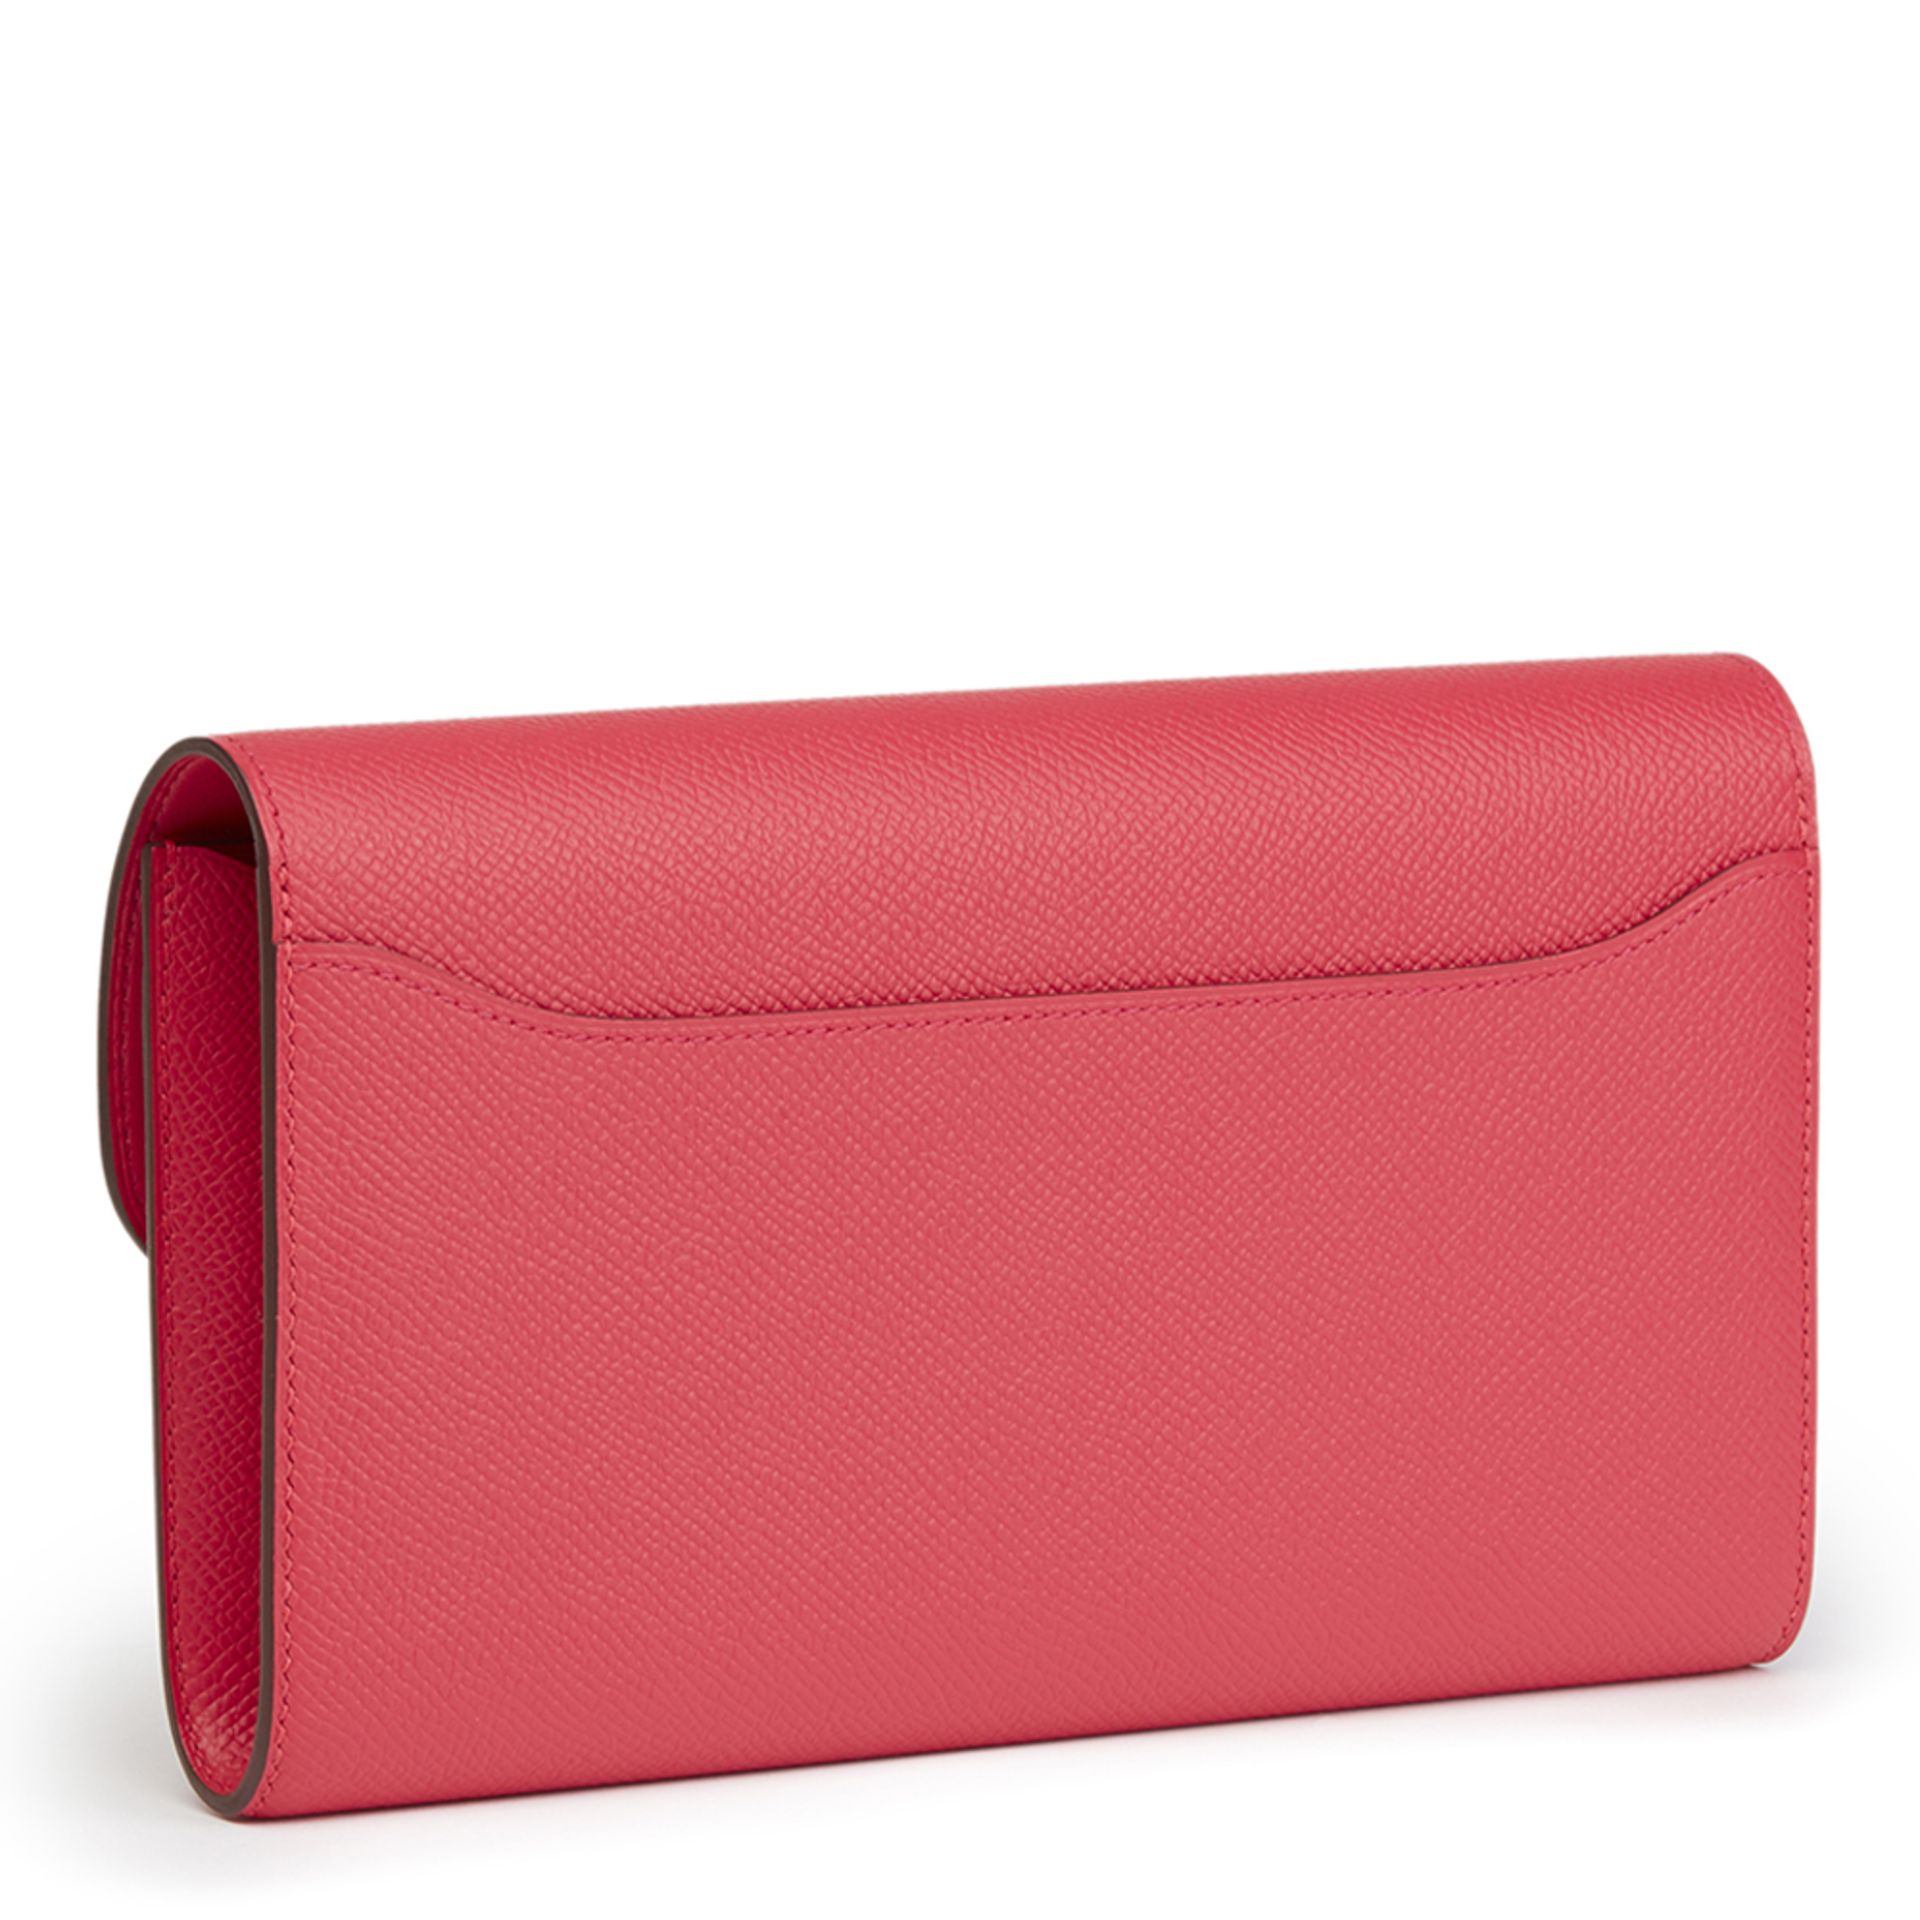 Rose Extreme Epsom Leather Constance Long Wallet - Image 4 of 12